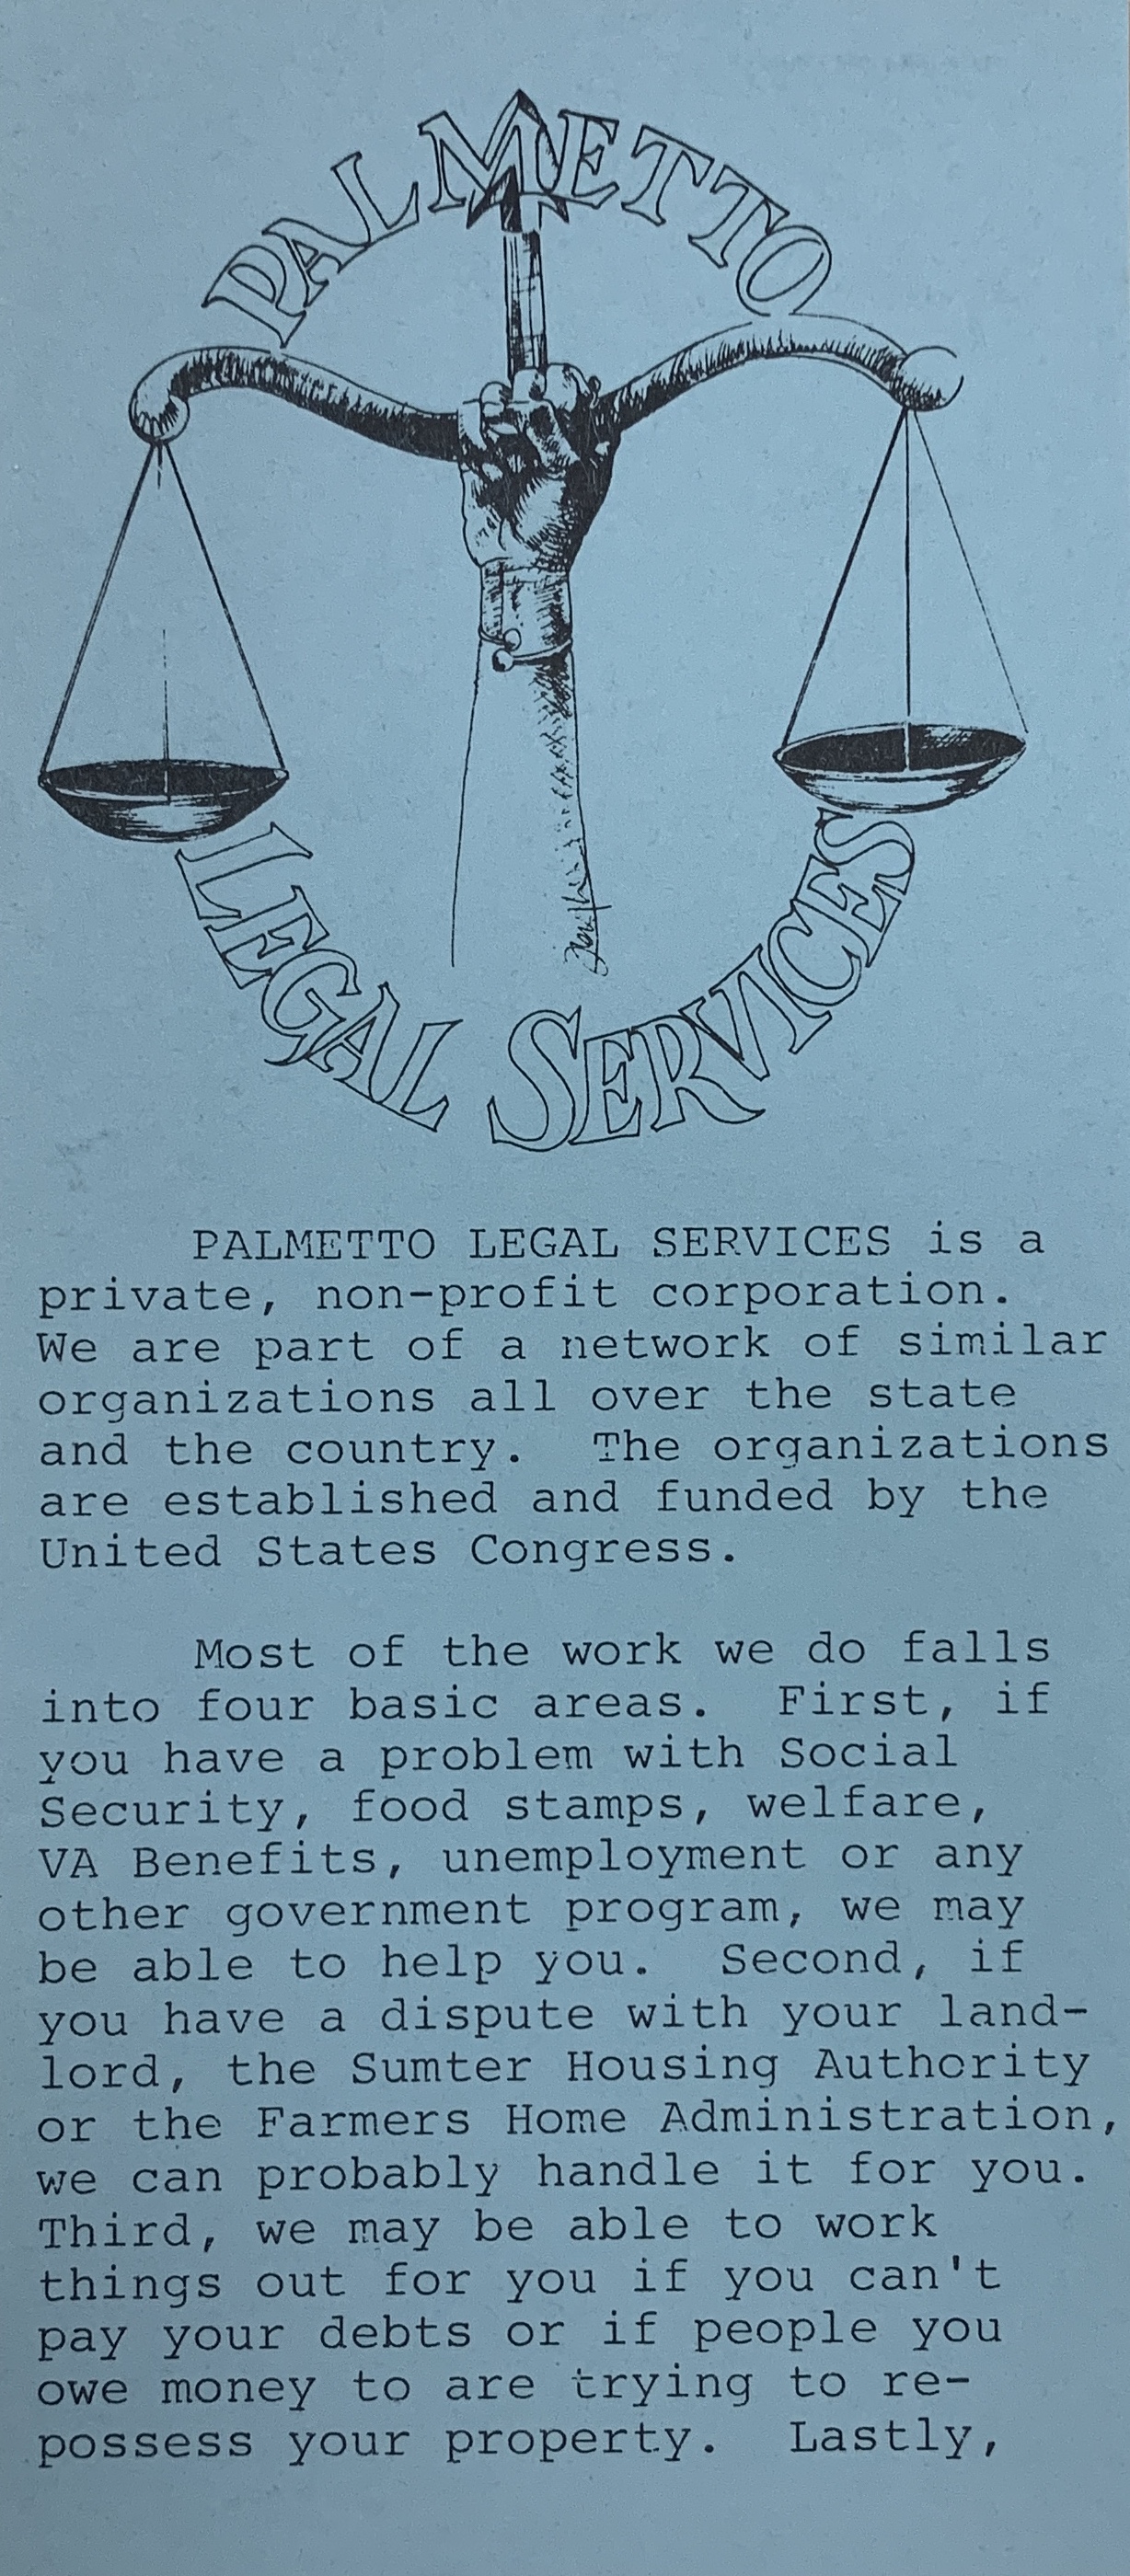 A brochure produced by Palmetto Legal Services, 1980s